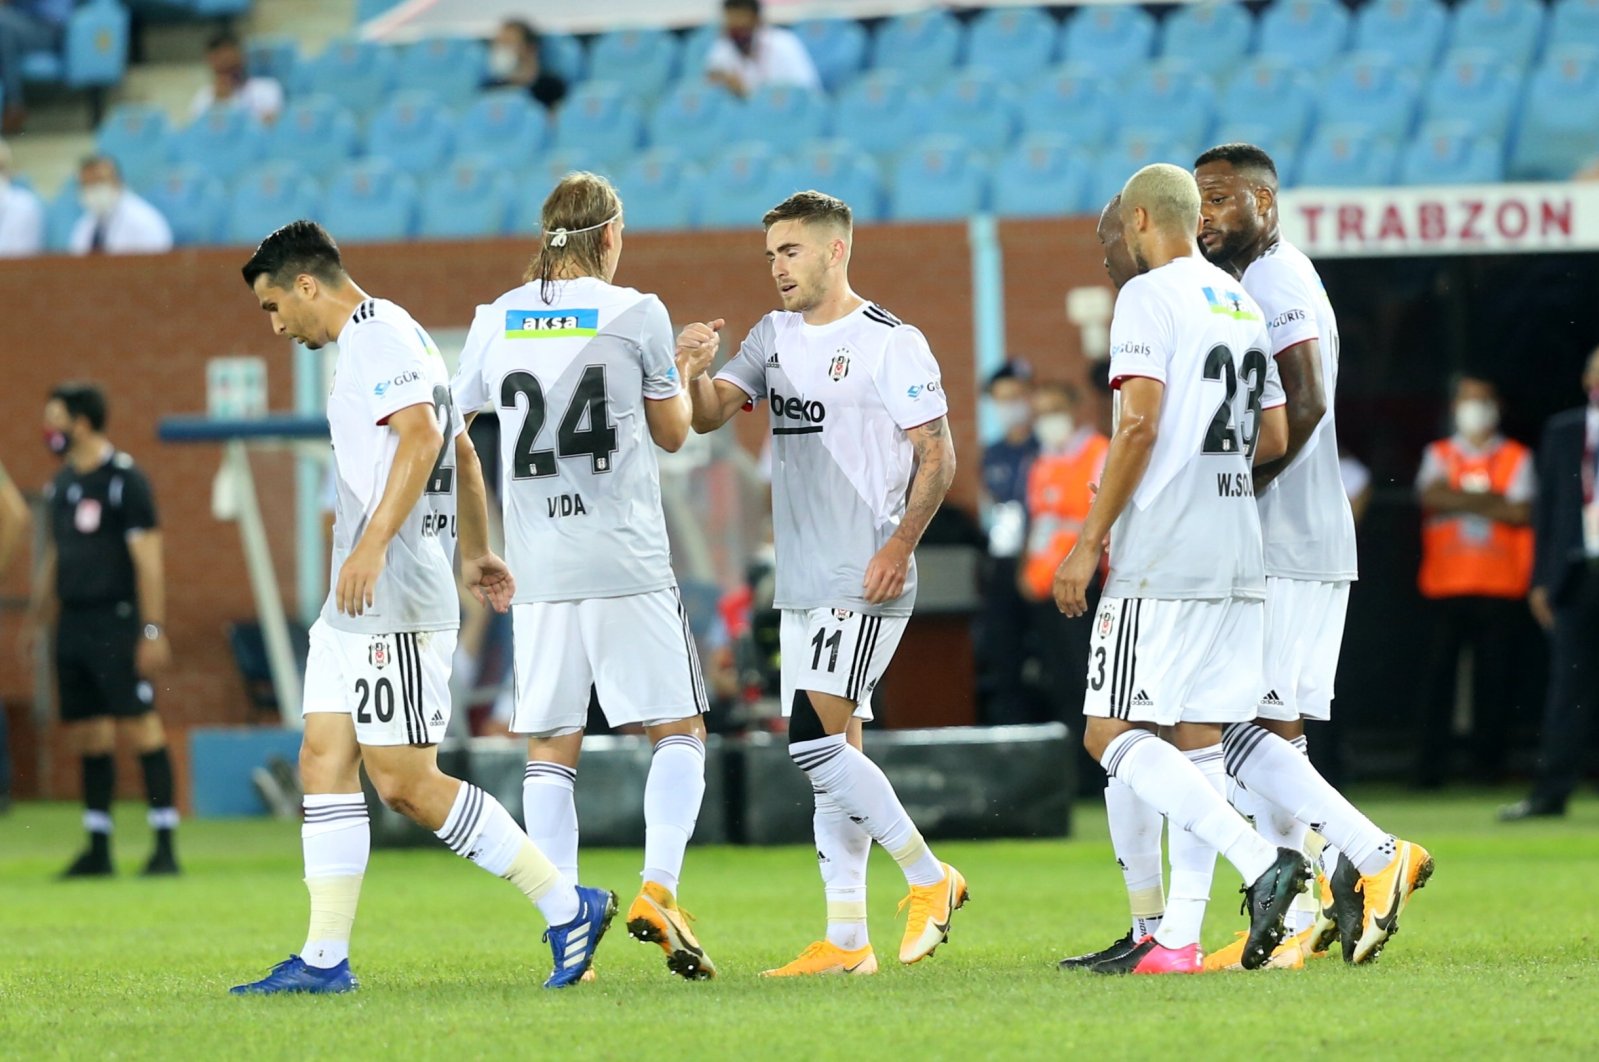 Beşiktaş players celebrate a goal during a Süper Lig match against Trabzonspor in Trabzon, Turkey, Sept. 13, 2020. (AA Photo)
